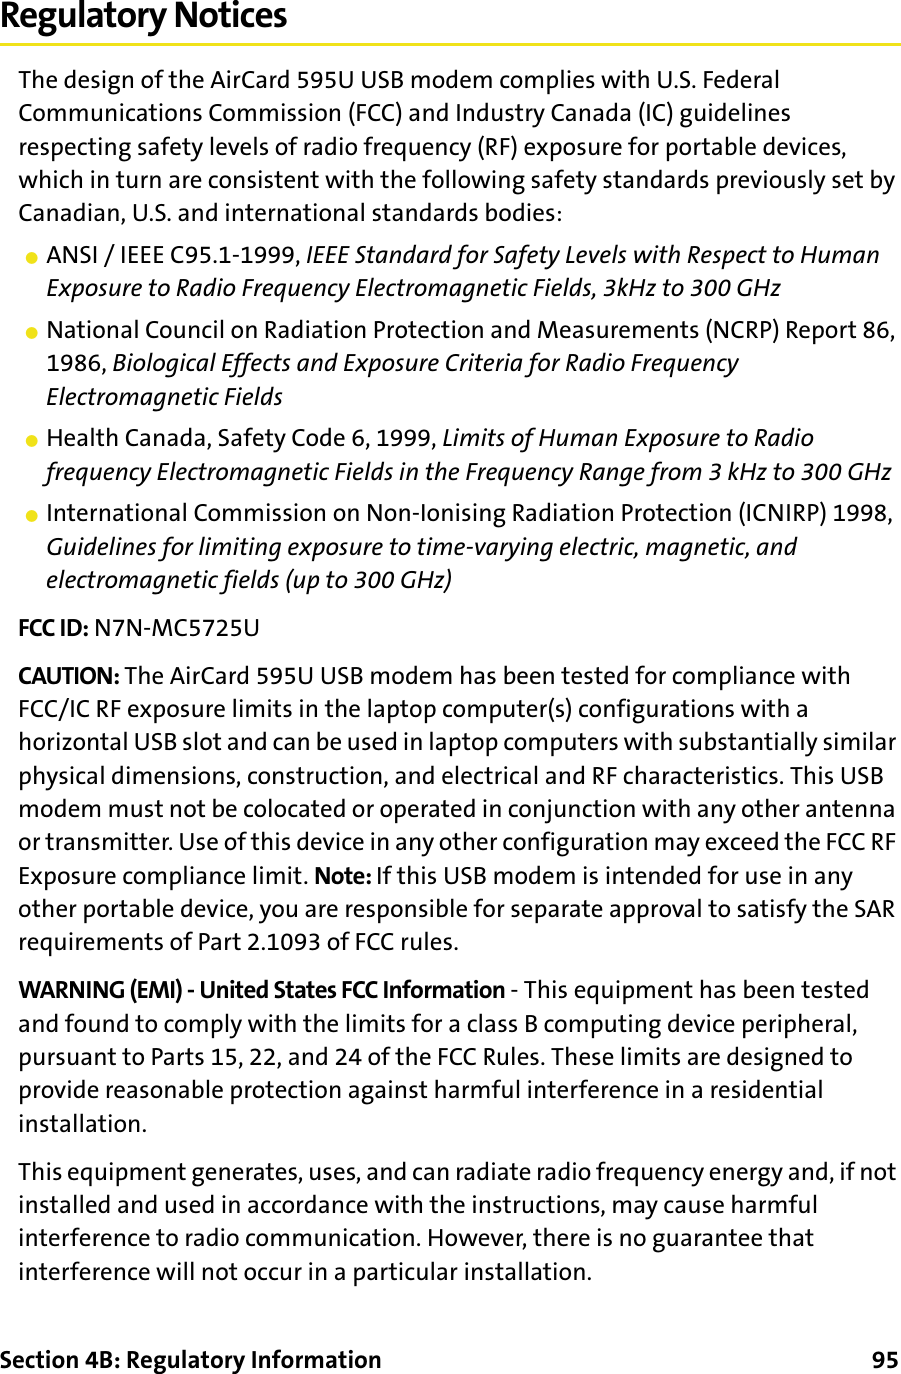 Section 4B: Regulatory Information      95Regulatory NoticesThe design of the AirCard 595U USB modem complies with U.S. Federal Communications Commission (FCC) and Industry Canada (IC) guidelines respecting safety levels of radio frequency (RF) exposure for portable devices, which in turn are consistent with the following safety standards previously set by Canadian, U.S. and international standards bodies:䢇ANSI / IEEE C95.1-1999, IEEE Standard for Safety Levels with Respect to Human Exposure to Radio Frequency Electromagnetic Fields, 3kHz to 300 GHz䢇National Council on Radiation Protection and Measurements (NCRP) Report 86, 1986, Biological Effects and Exposure Criteria for Radio Frequency Electromagnetic Fields䢇Health Canada, Safety Code 6, 1999, Limits of Human Exposure to Radio frequency Electromagnetic Fields in the Frequency Range from 3 kHz to 300 GHz䢇International Commission on Non-Ionising Radiation Protection (ICNIRP) 1998, Guidelines for limiting exposure to time-varying electric, magnetic, and electromagnetic fields (up to 300 GHz)FCC ID: N7N-MC5725UCAUTION: The AirCard 595U USB modem has been tested for compliance with FCC/IC RF exposure limits in the laptop computer(s) configurations with a horizontal USB slot and can be used in laptop computers with substantially similar physical dimensions, construction, and electrical and RF characteristics. This USB modem must not be colocated or operated in conjunction with any other antenna or transmitter. Use of this device in any other configuration may exceed the FCC RF Exposure compliance limit. Note: If this USB modem is intended for use in any other portable device, you are responsible for separate approval to satisfy the SAR requirements of Part 2.1093 of FCC rules.WARNING (EMI) - United States FCC Information - This equipment has been tested and found to comply with the limits for a class B computing device peripheral, pursuant to Parts 15, 22, and 24 of the FCC Rules. These limits are designed to provide reasonable protection against harmful interference in a residential installation.This equipment generates, uses, and can radiate radio frequency energy and, if not installed and used in accordance with the instructions, may cause harmful interference to radio communication. However, there is no guarantee that interference will not occur in a particular installation.